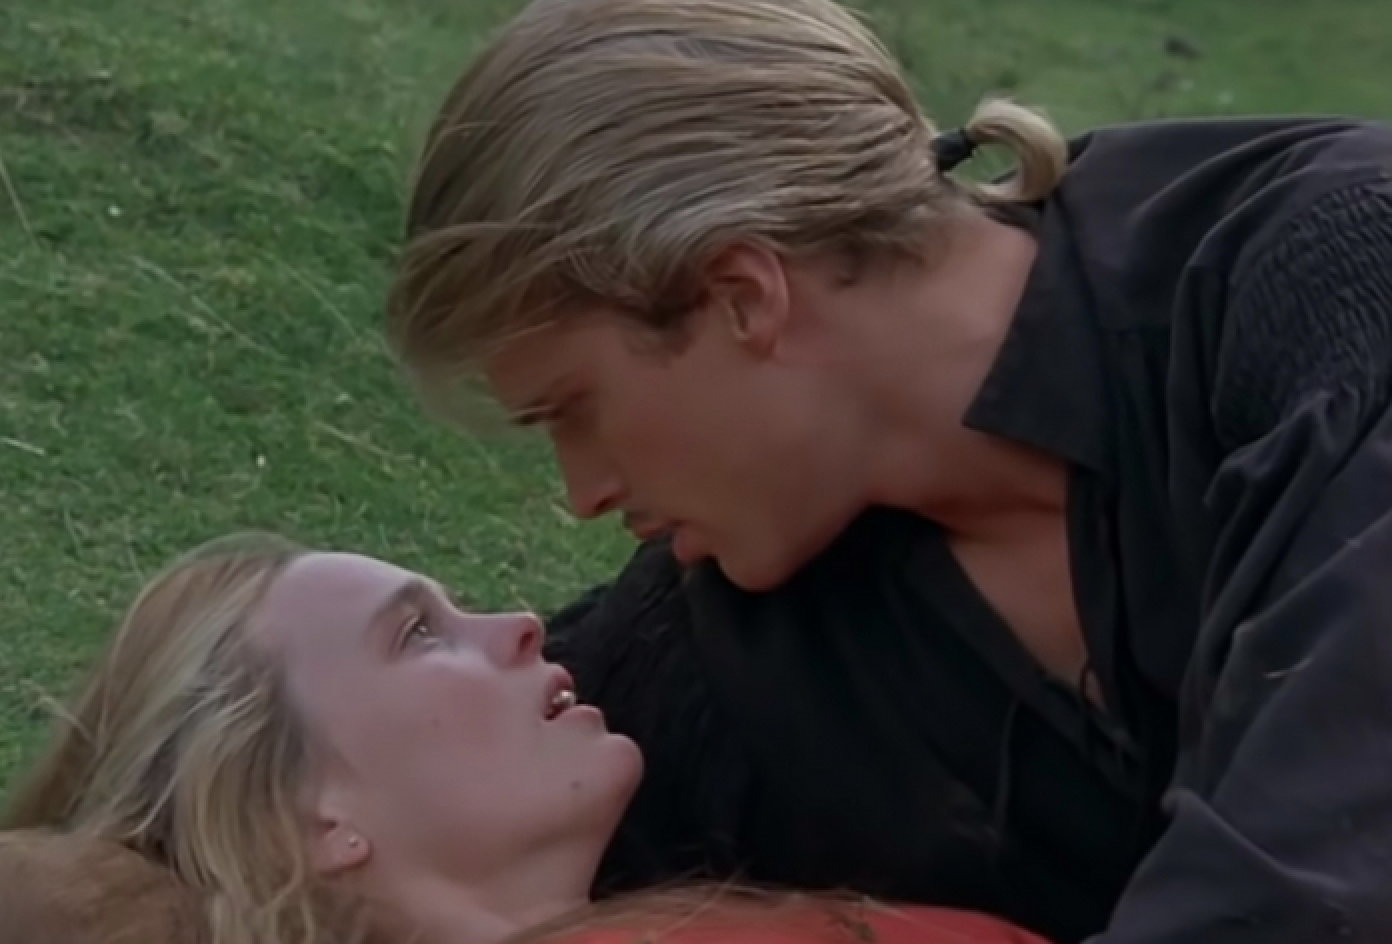 Two characters from &#x27;The Princess Bride,&#x27; Westley and Buttercup, share an intimate moment